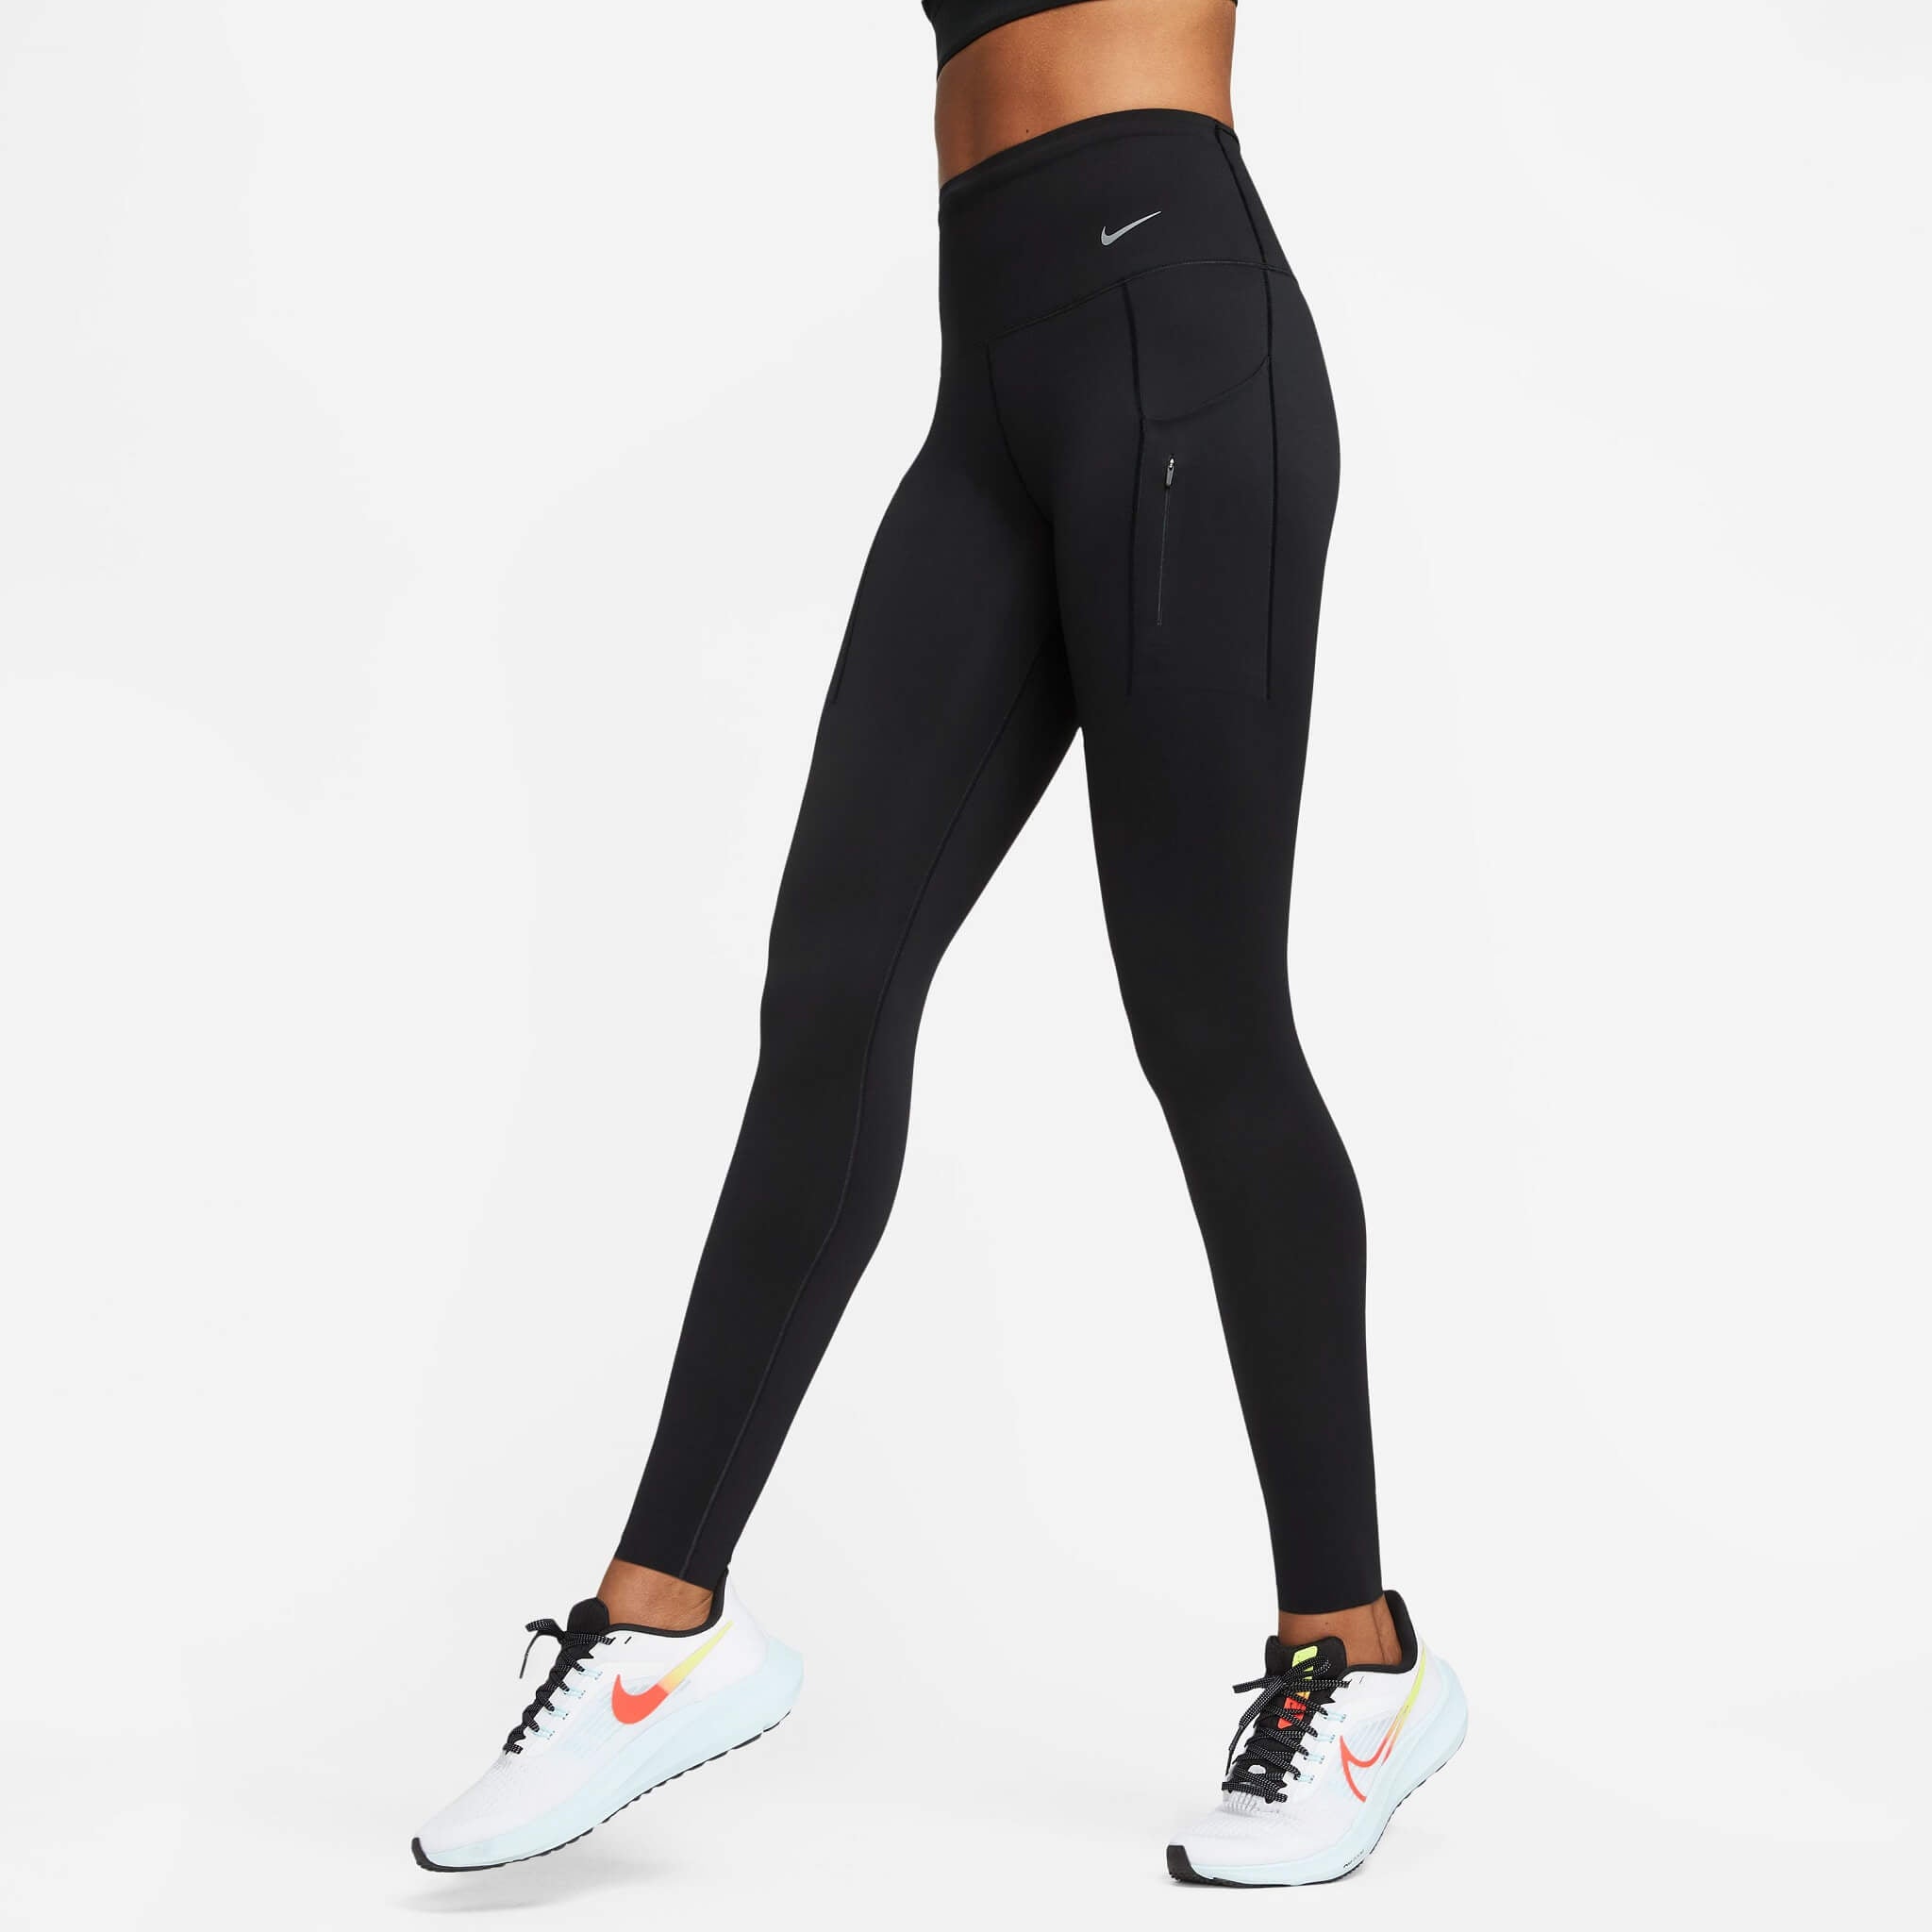 NIKE Women's Essential Dri-FIT Tights  Womens workout outfits, Winter  running leggings, Sport outfits